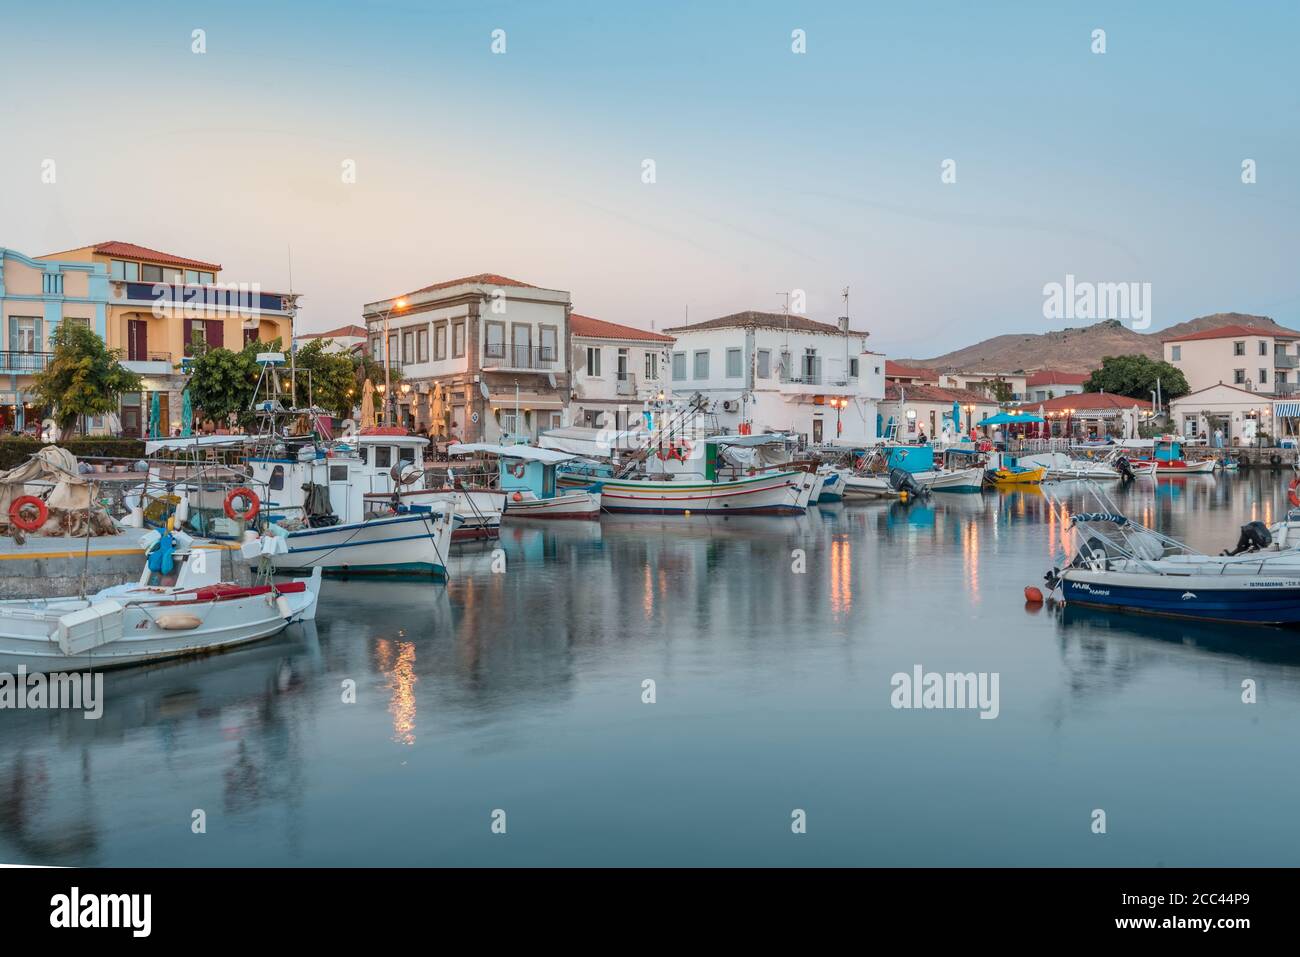 Myrina, Lemnos island, Greece the magical touristic Greek islands at sunset. Port of Limnos panoramic view at dusk. Long exposure HDR landscape photog Stock Photo